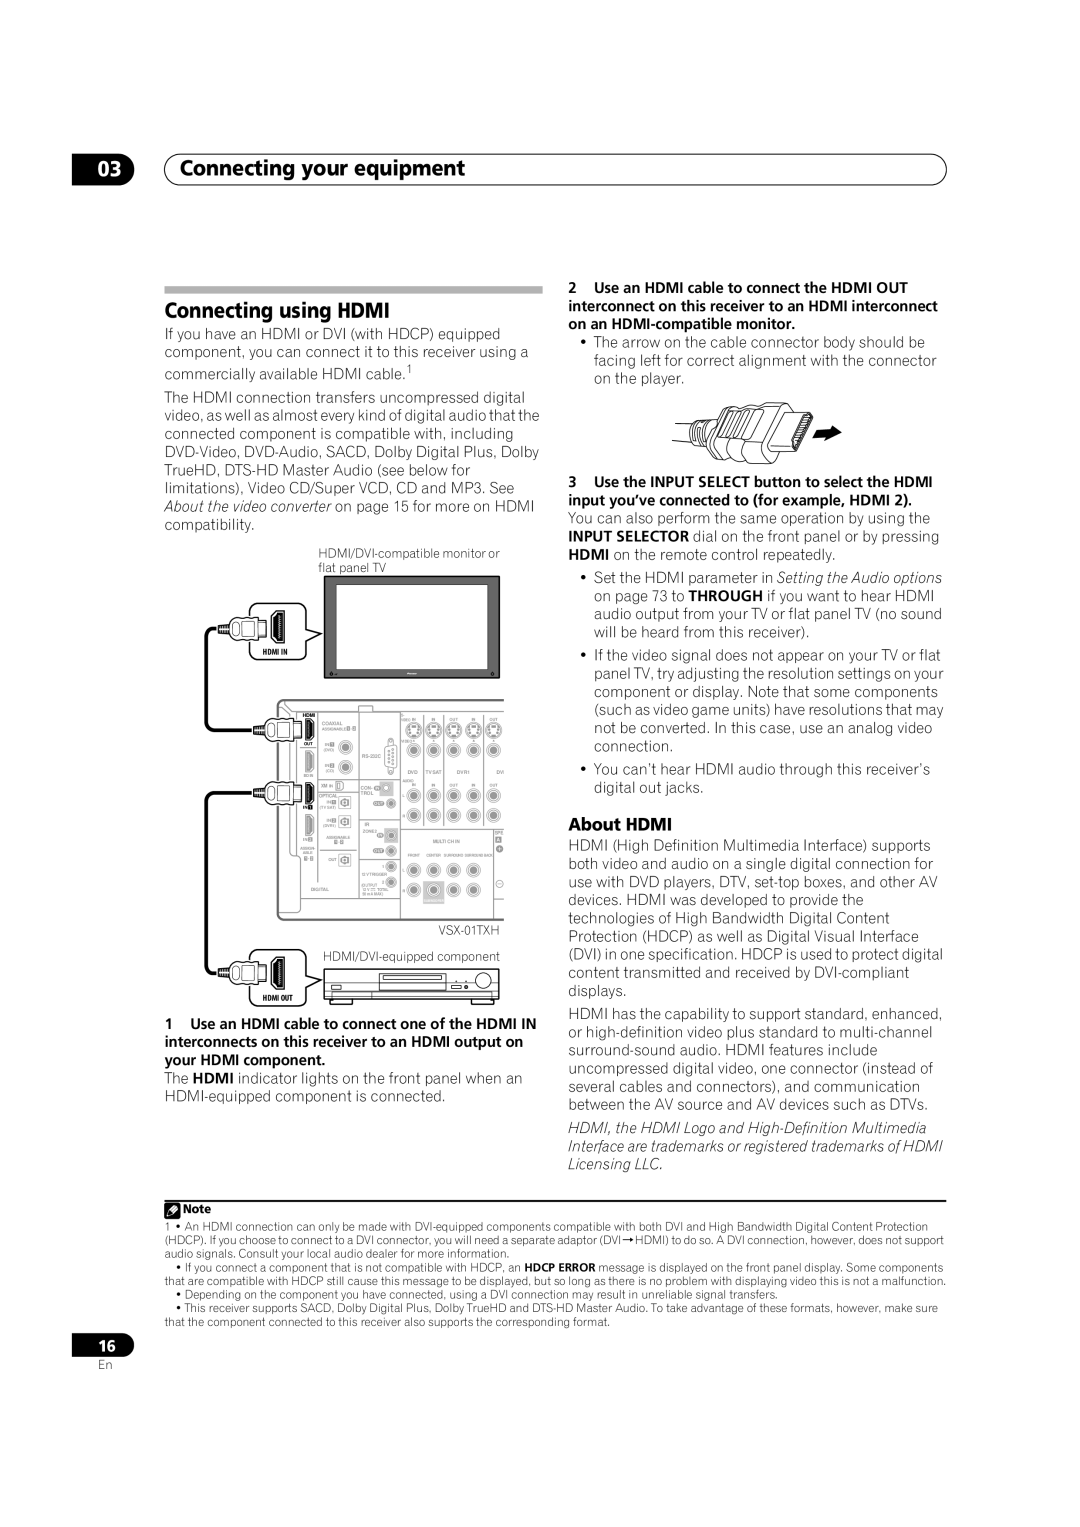 Pioneer VSX-01TXH manual 03Connecting your equipment Connecting using HDMI, About HDMI 